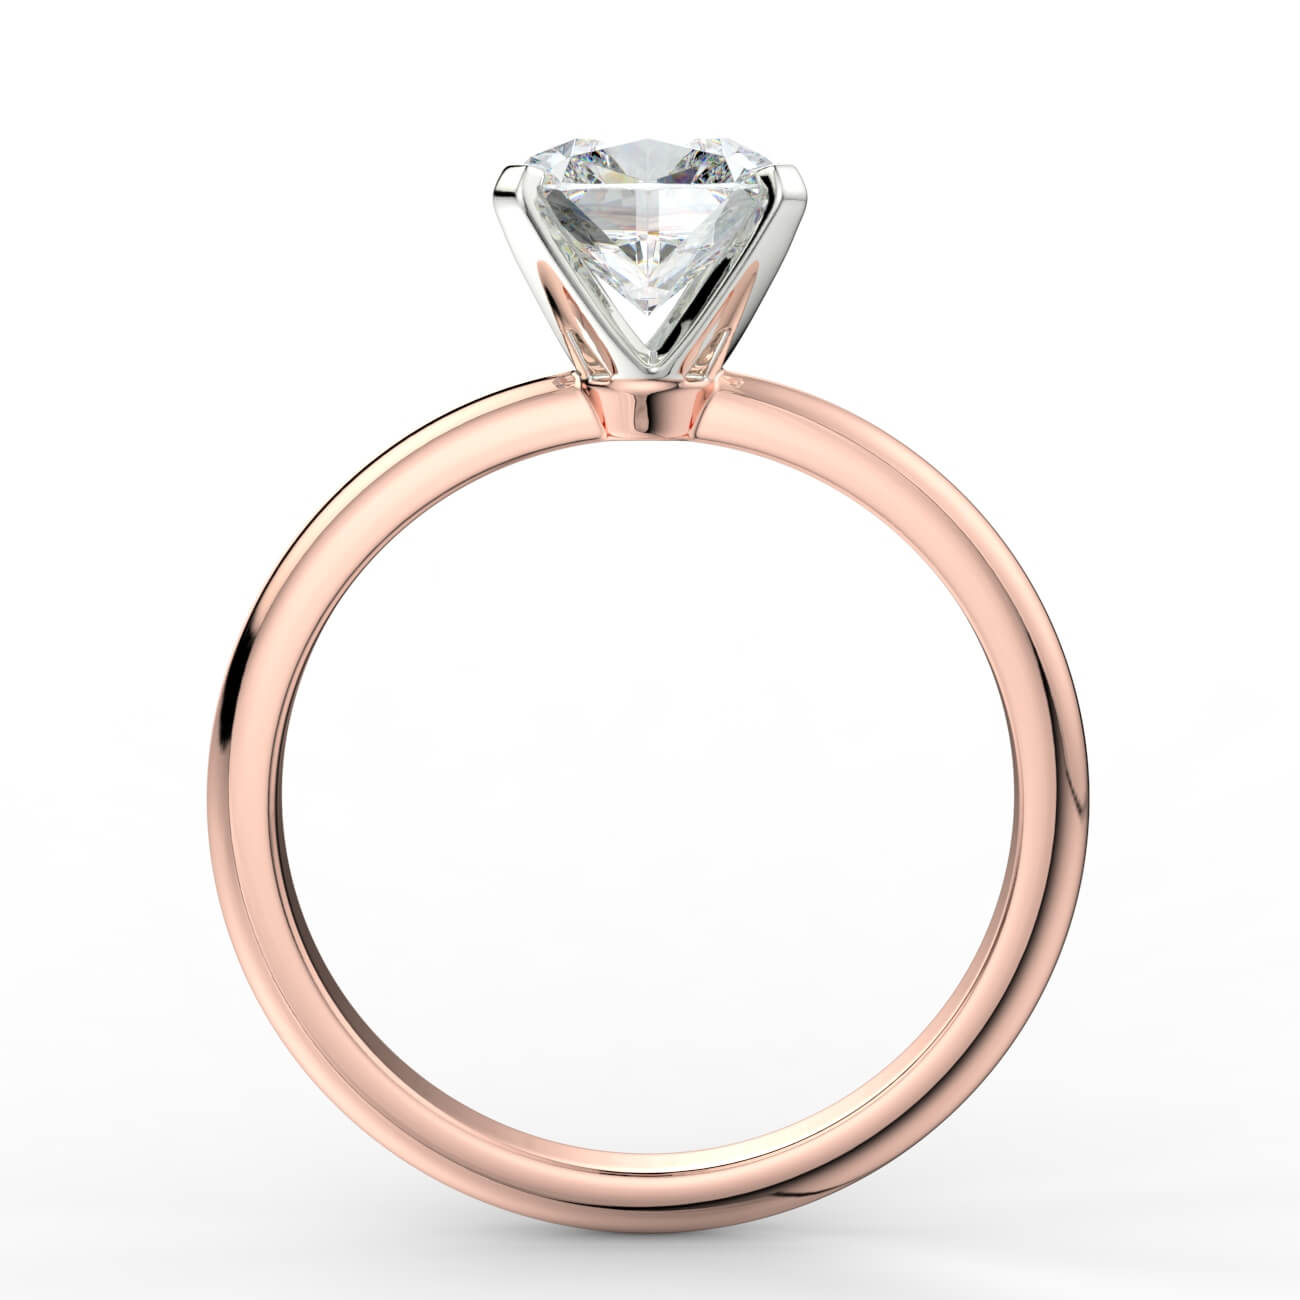 Knife-edge solitaire cushion cut diamond engagement ring in rose and white gold – Australian Diamond Network